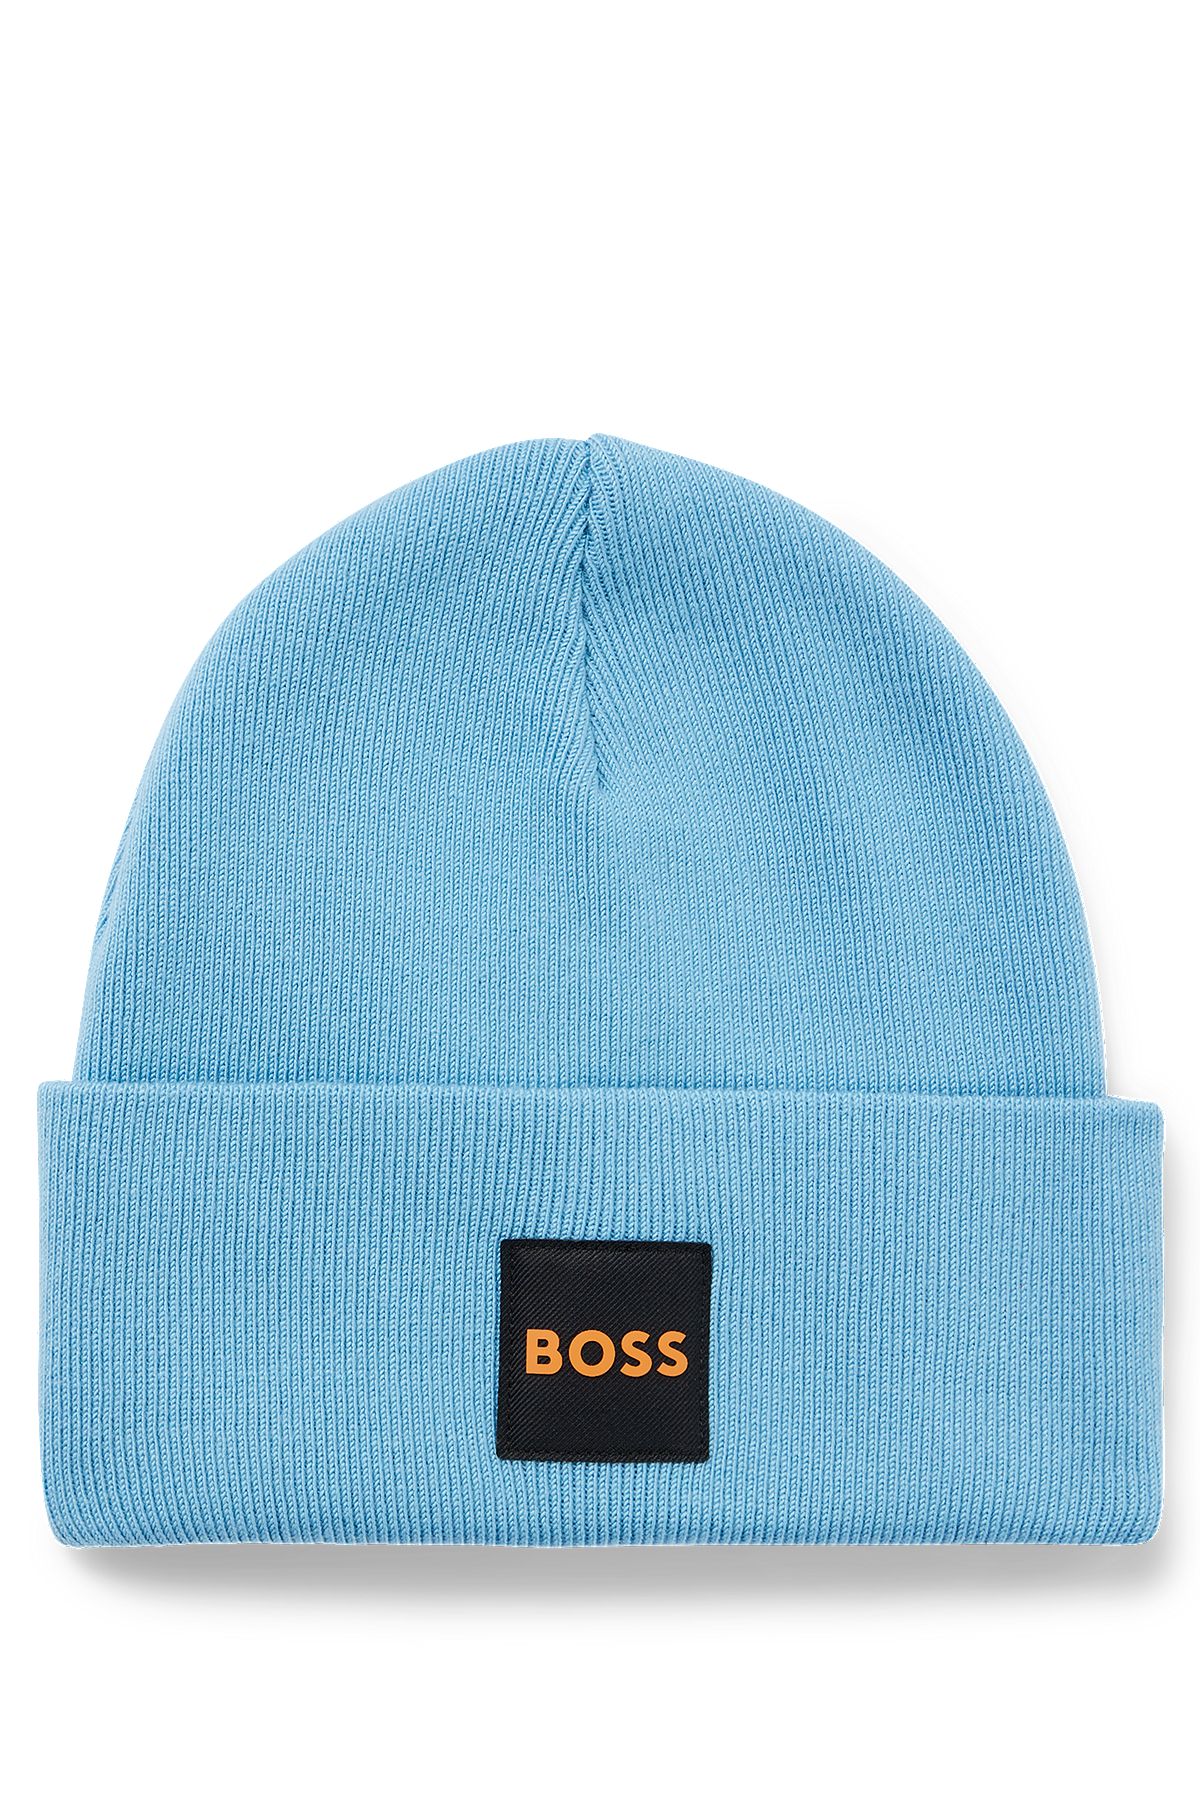 Double-layer beanie hat with logo patch, Light Blue